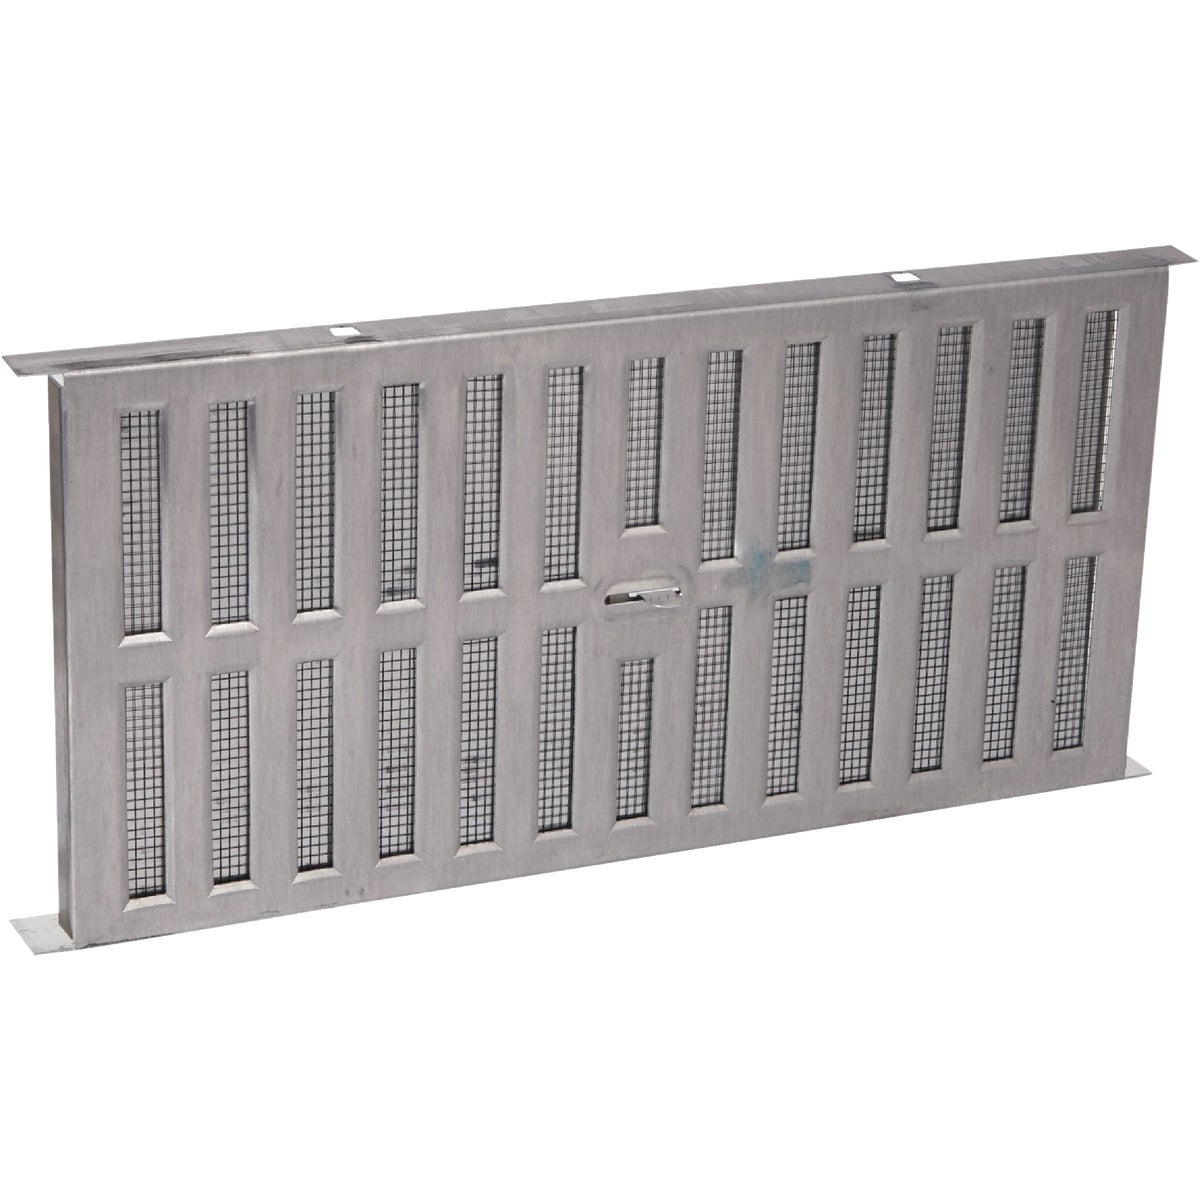 Air Vent FA109000 Air Vent 8 In. x 16 In. Aluminum Manual Foundation Vent with Adjustable Sliding Damper FA109000